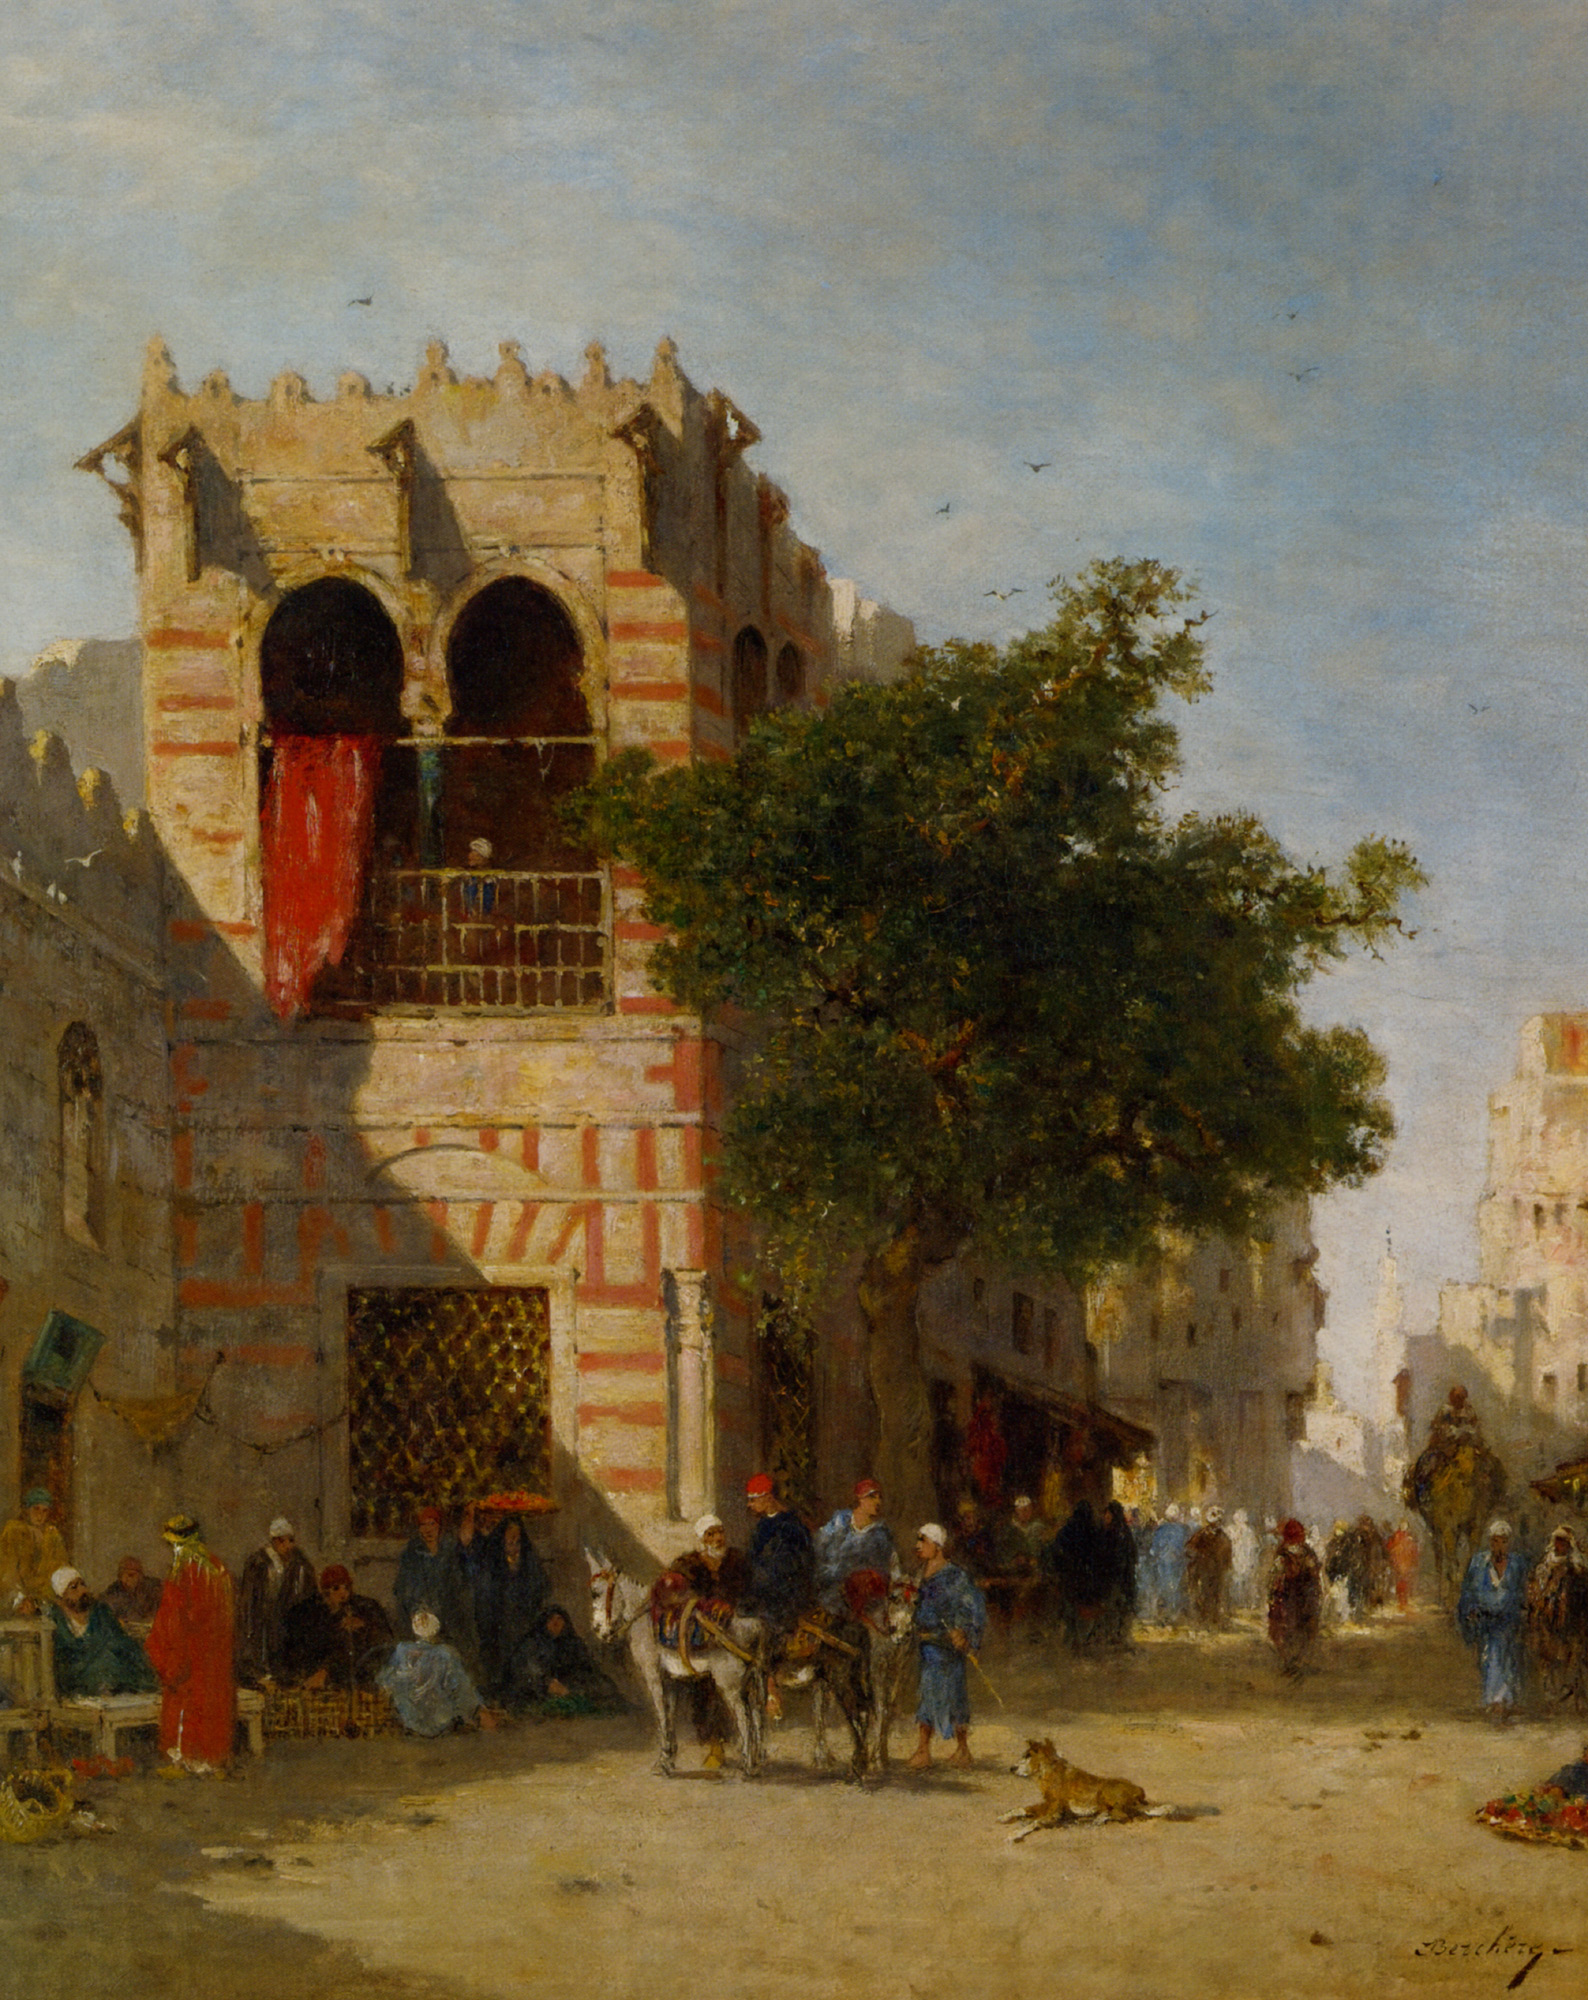 A Busy Street ­Cairo by Narcisse Berchere